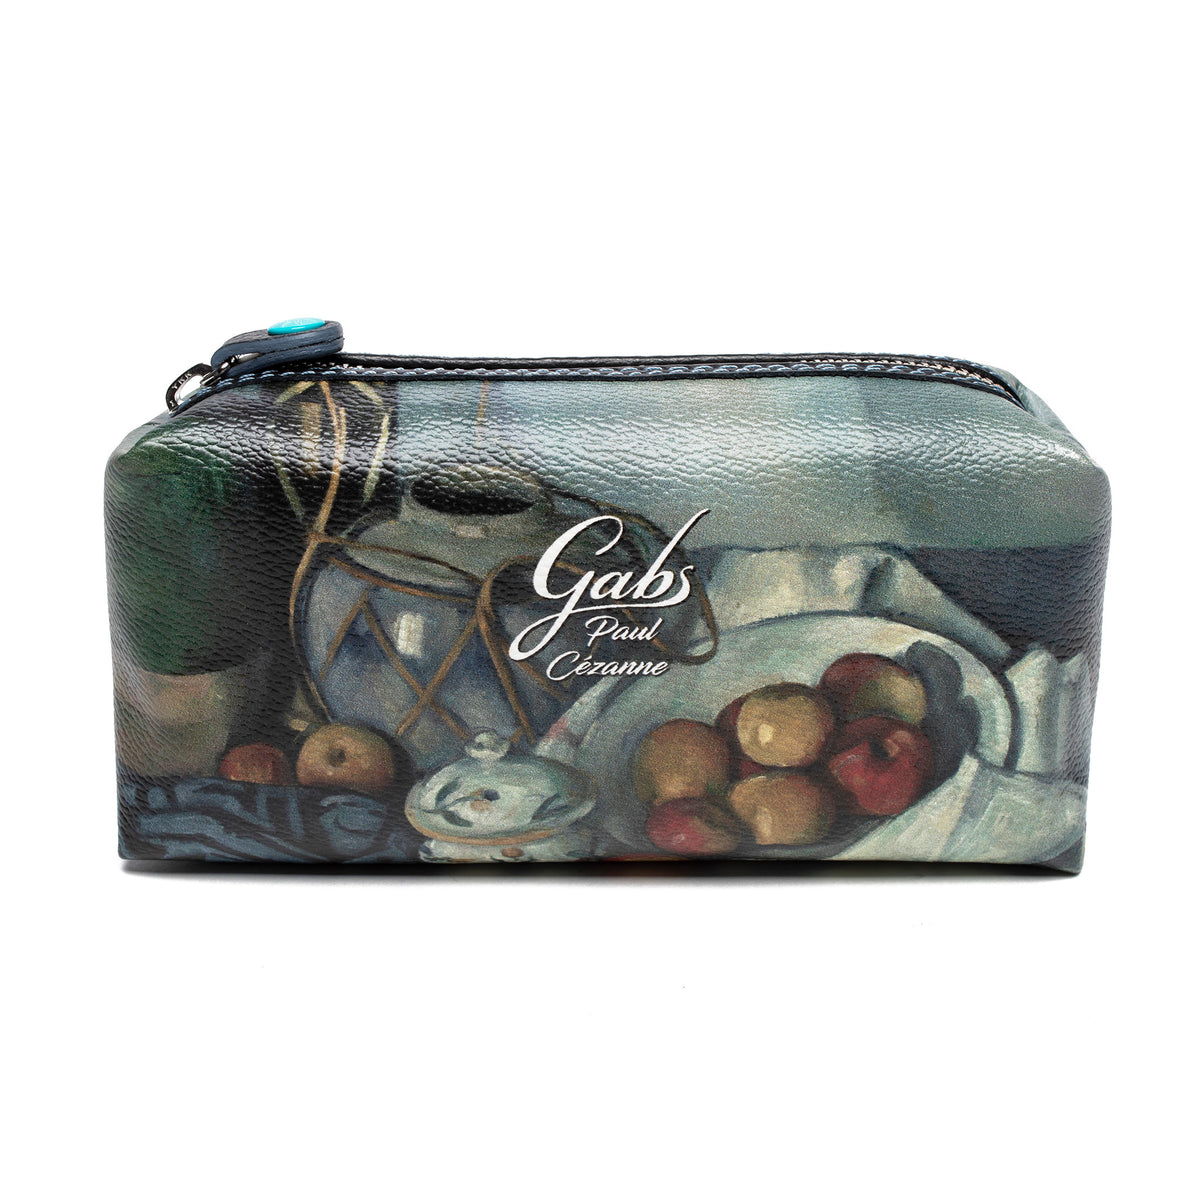 Cosmetics Bag featuring Cezanne&#39;s Still Life with Fruit by Gabs, Italy